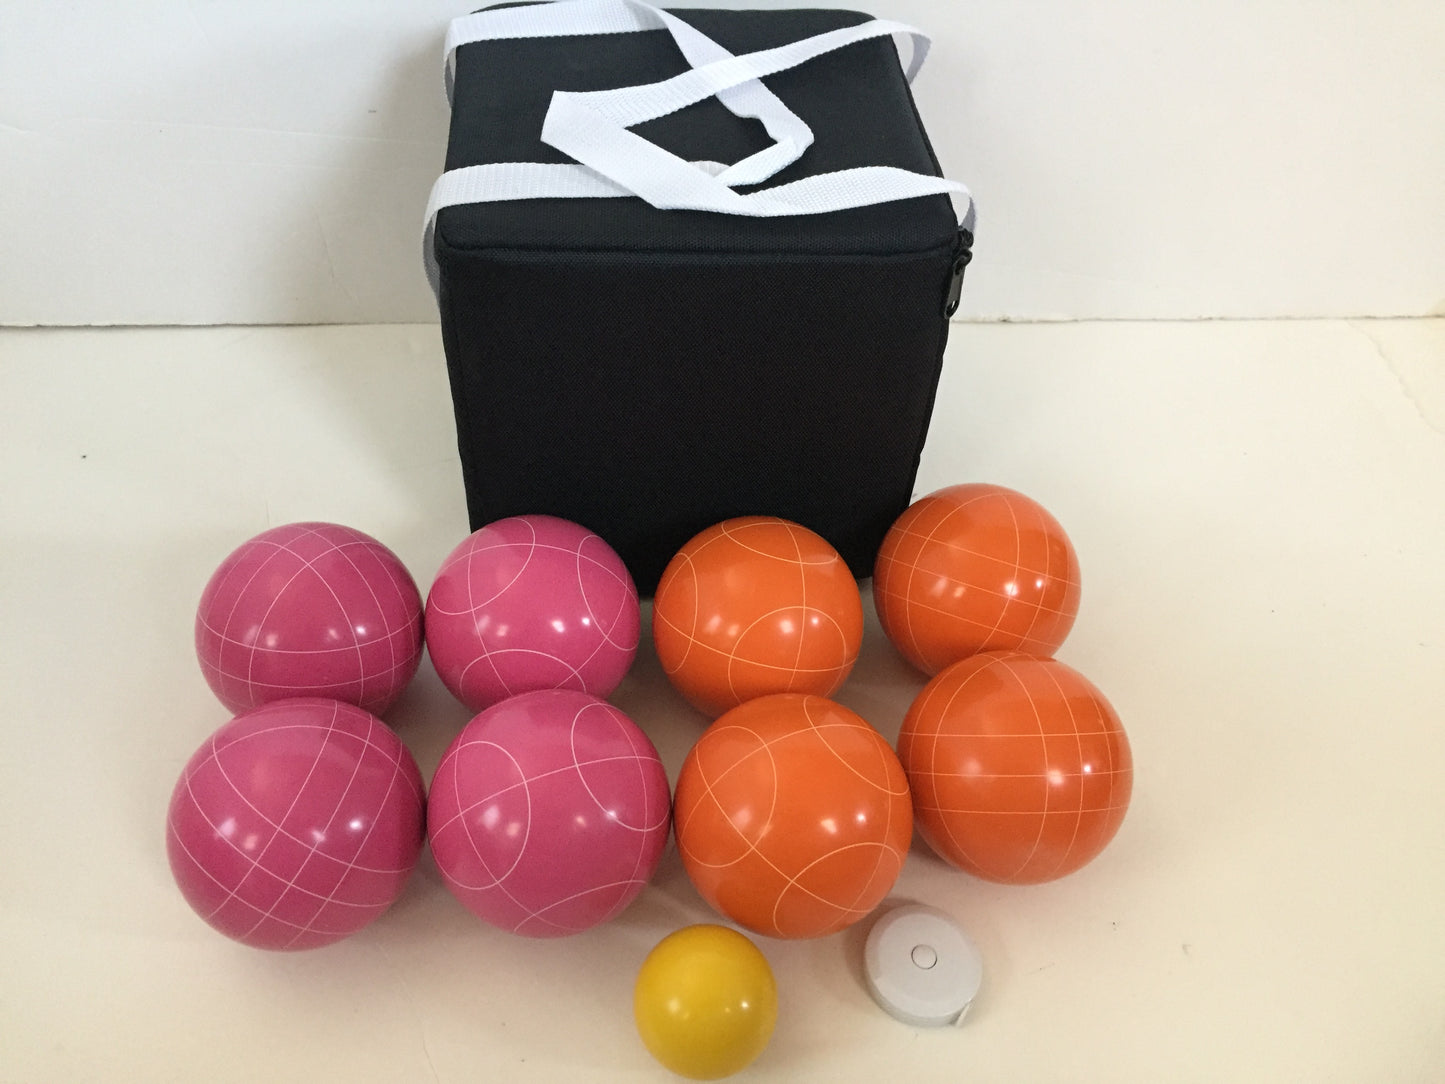 107mm with Orange and Pink Balls with Black Bag